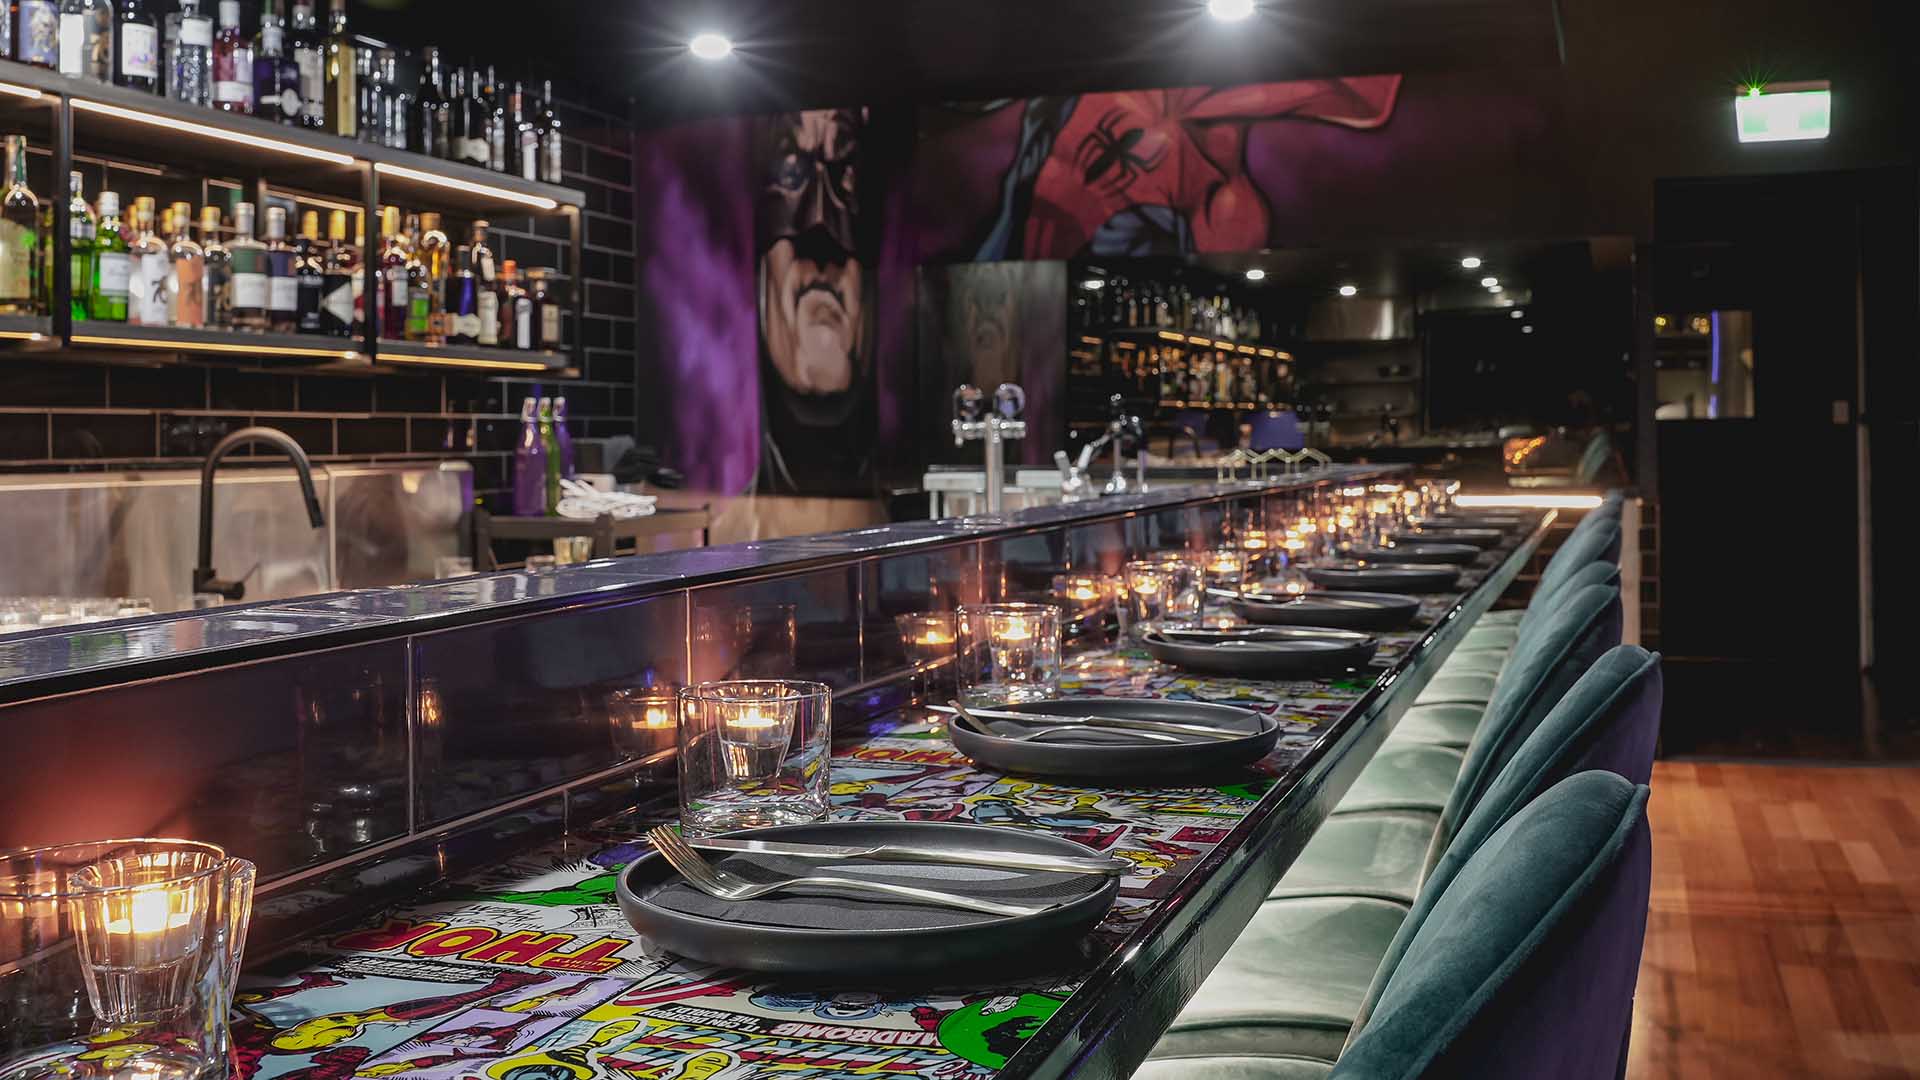 1st Edition Is Brisbane's New Comic Book-Inspired Bar and Eatery Serving Superhero-Themed Cocktails